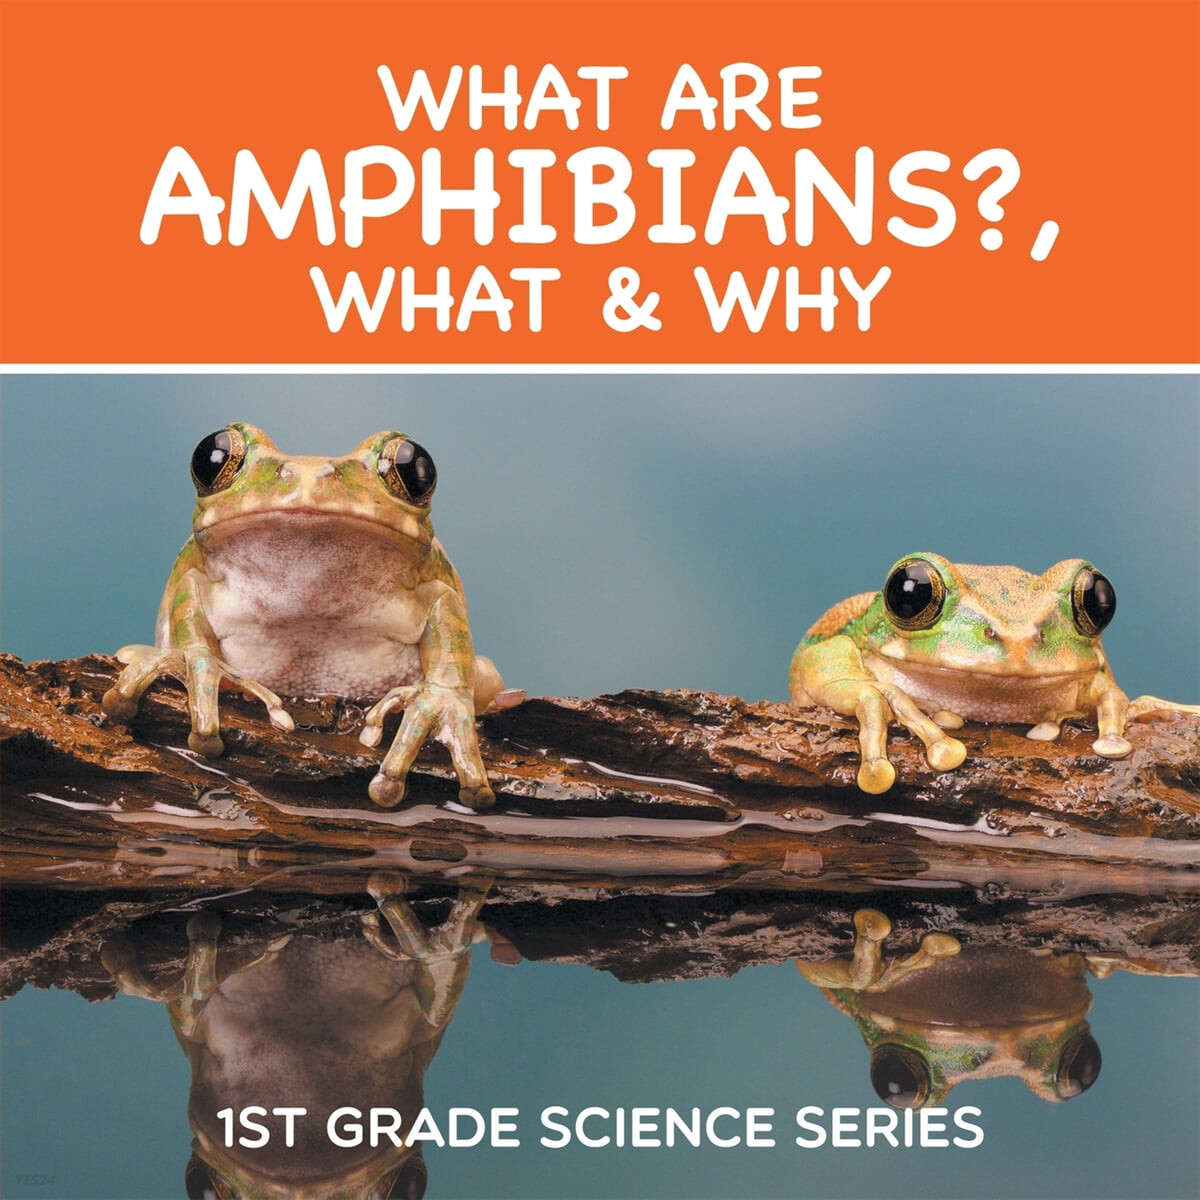 What Are Amphibians?, What & Why (1st Grade Science Series)